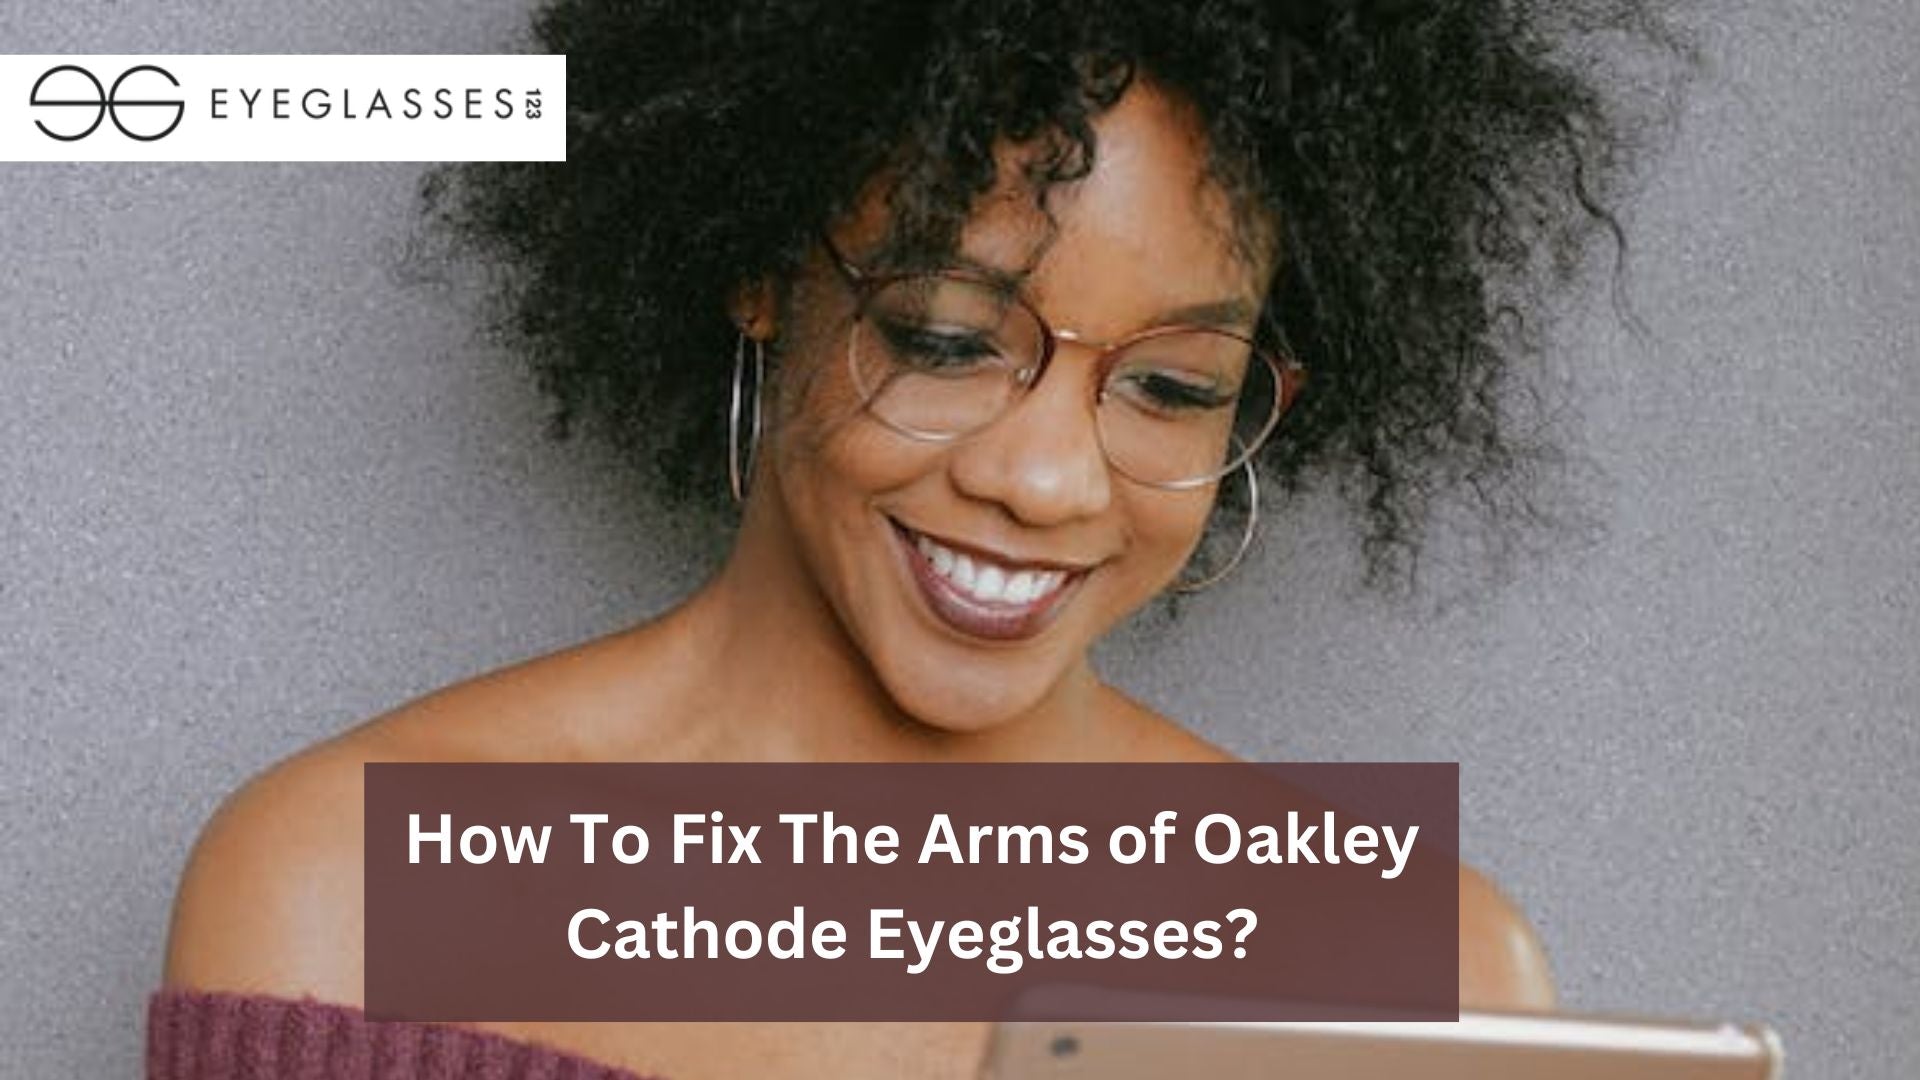 How To Fix The Arms of Oakley Cathode Eyeglasses?